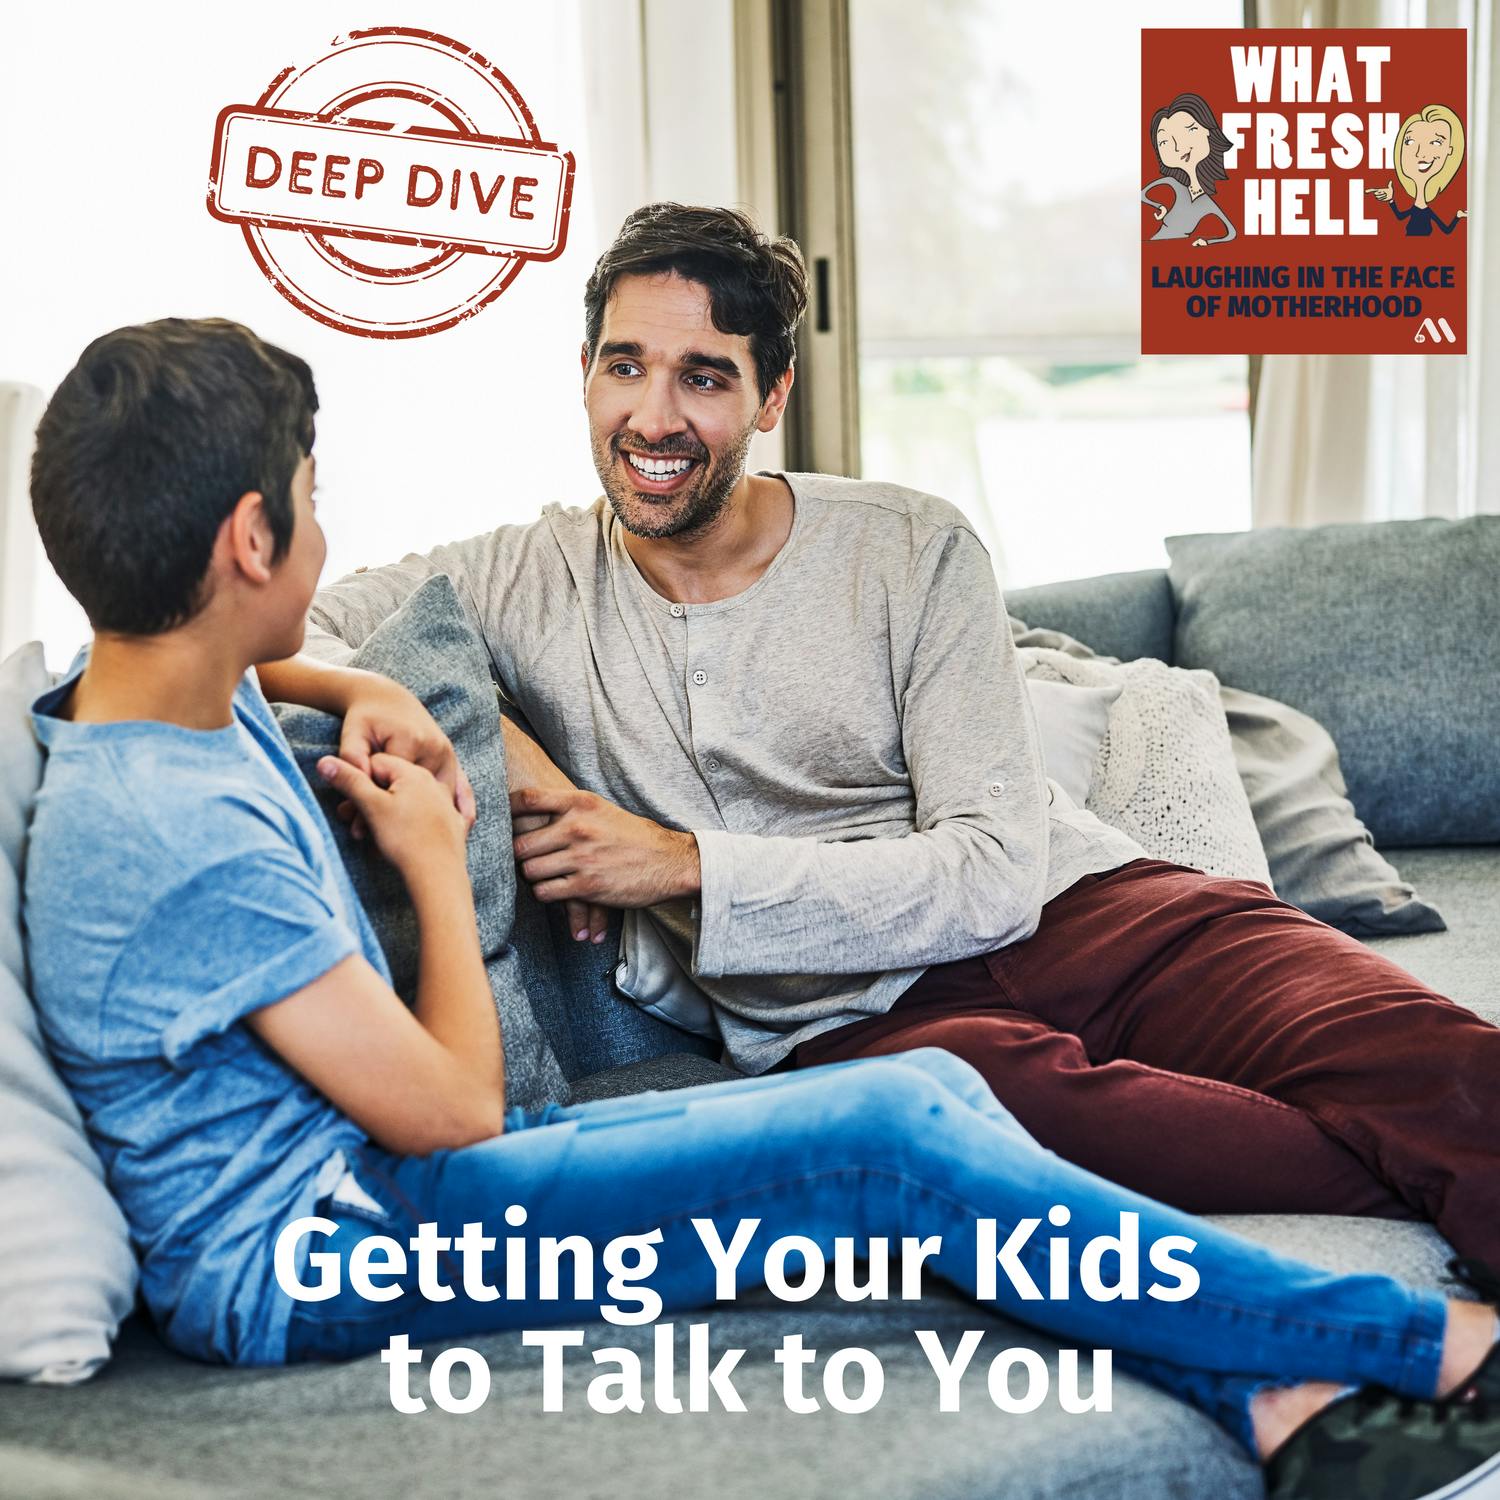 DEEP DIVE: Getting Your Kids To Talk To You